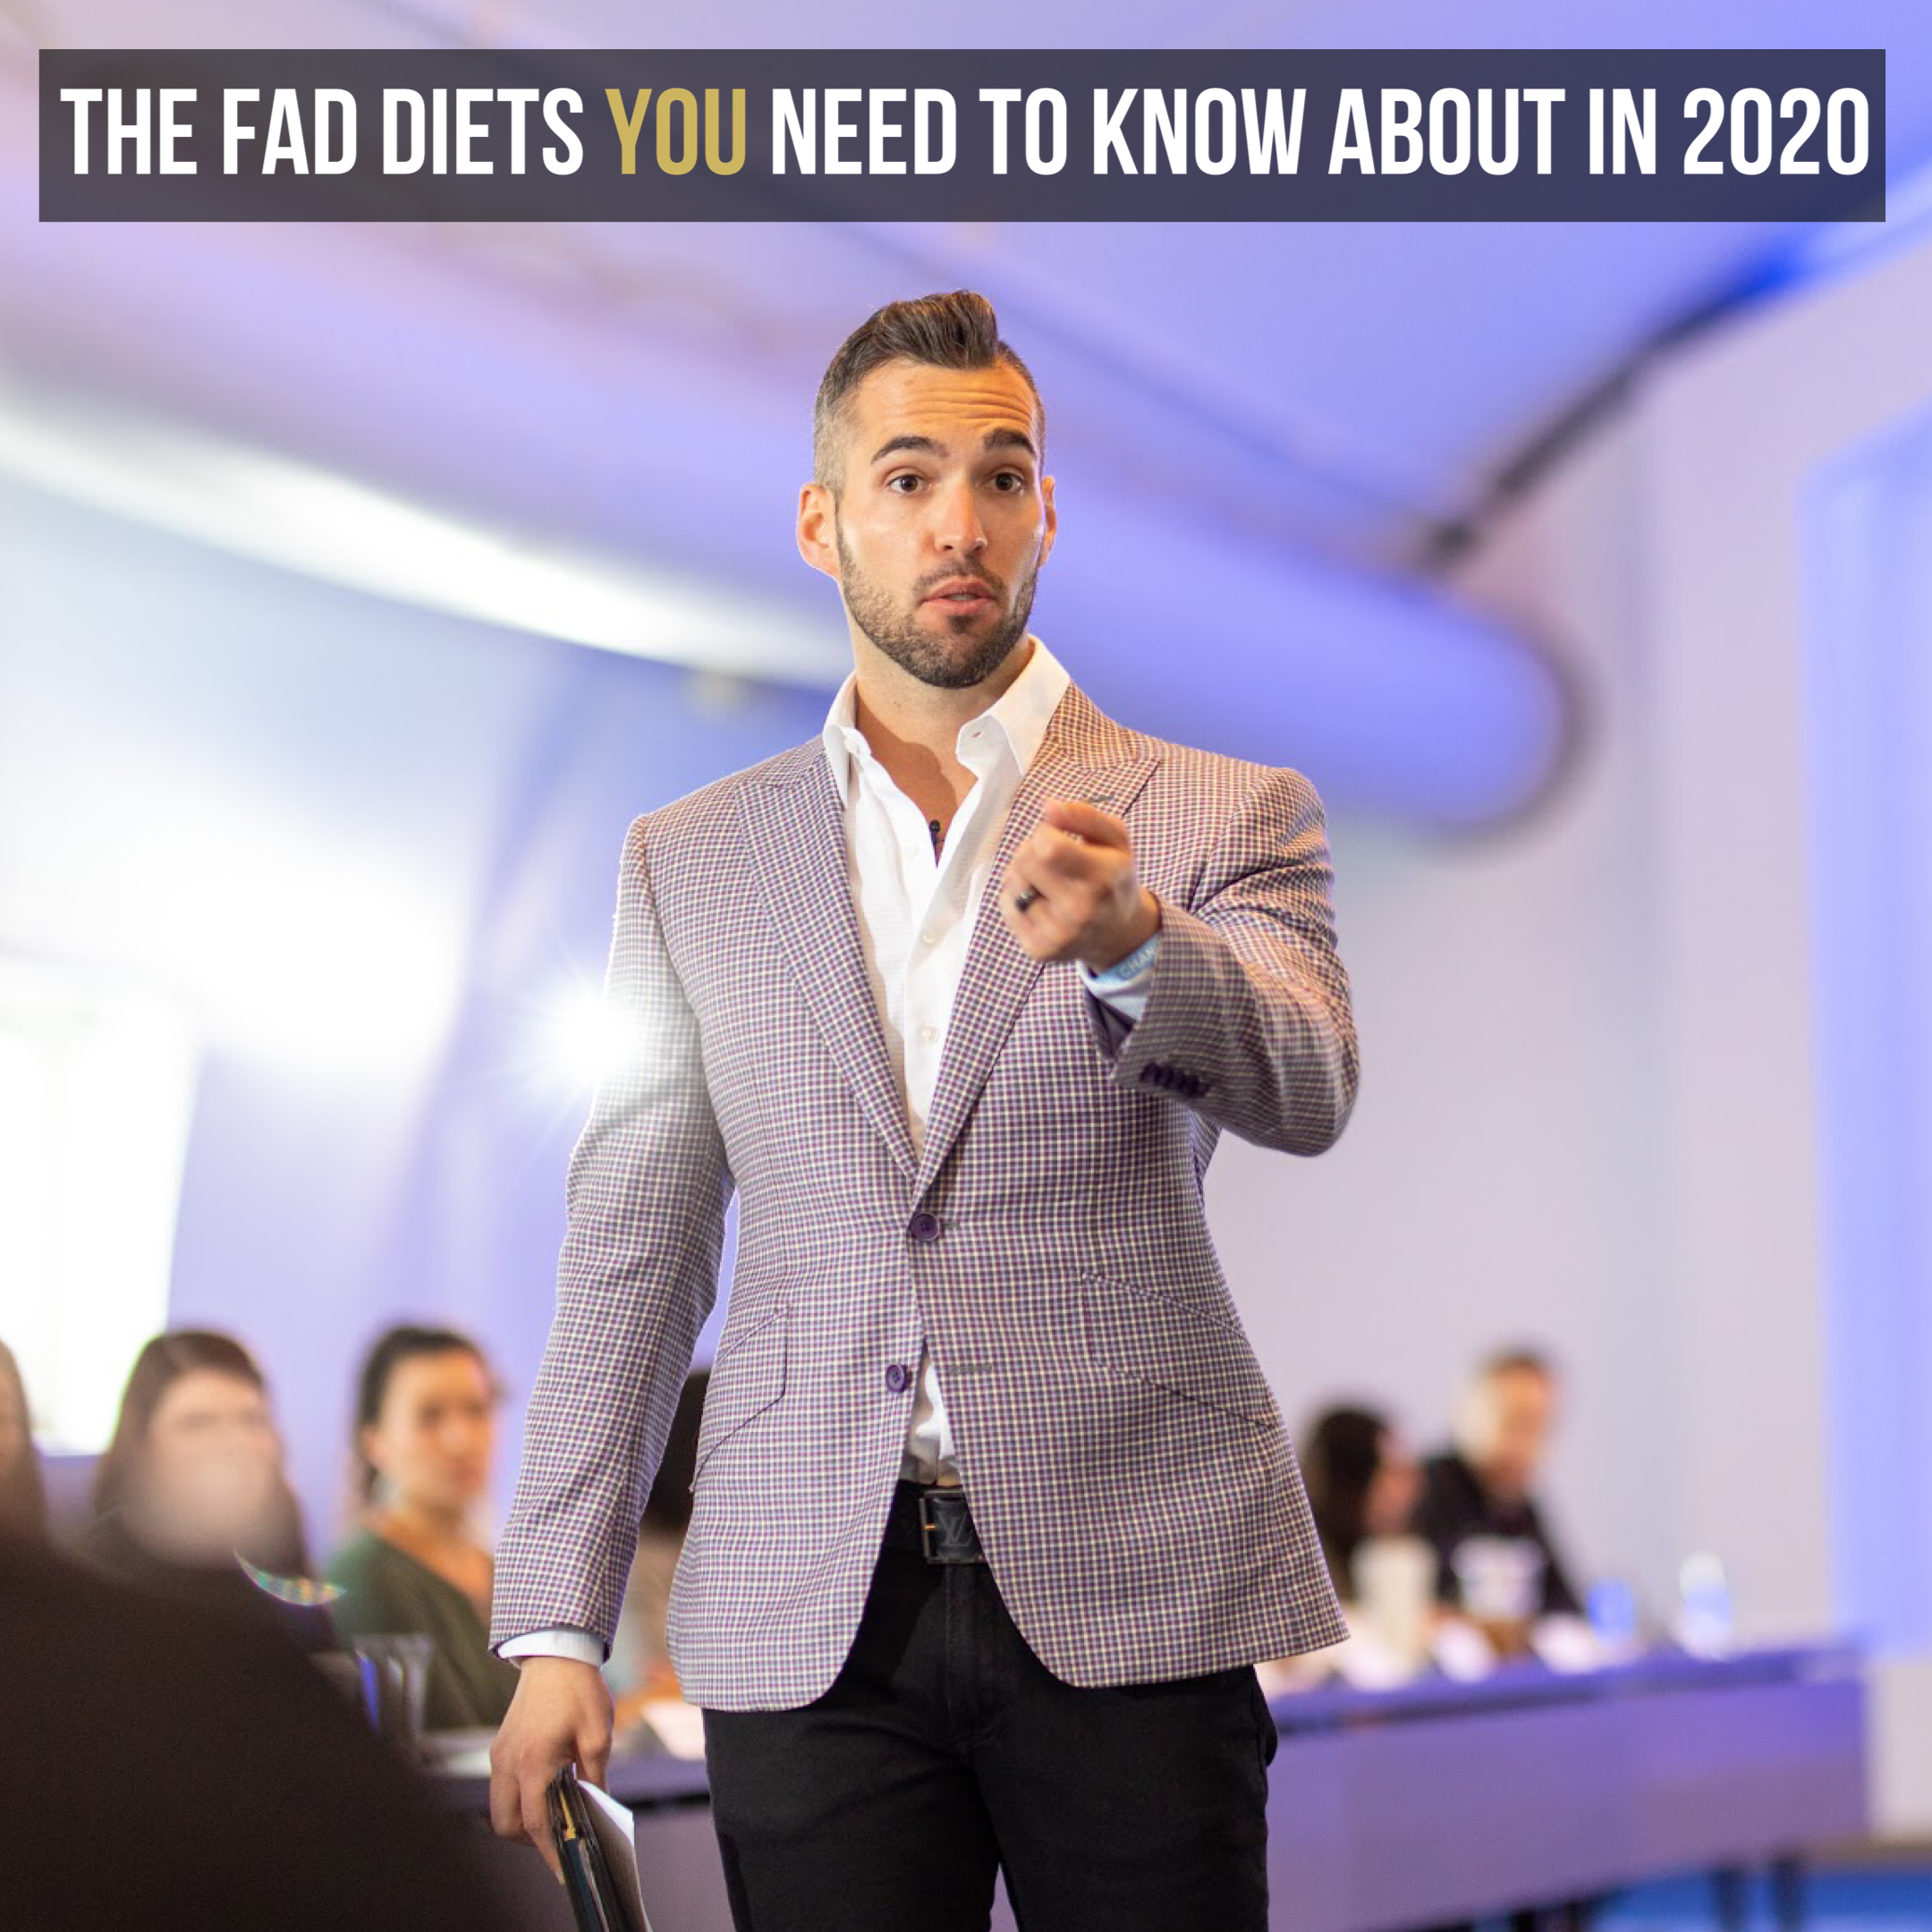 The Fad Diets You Need To Know About in 2020